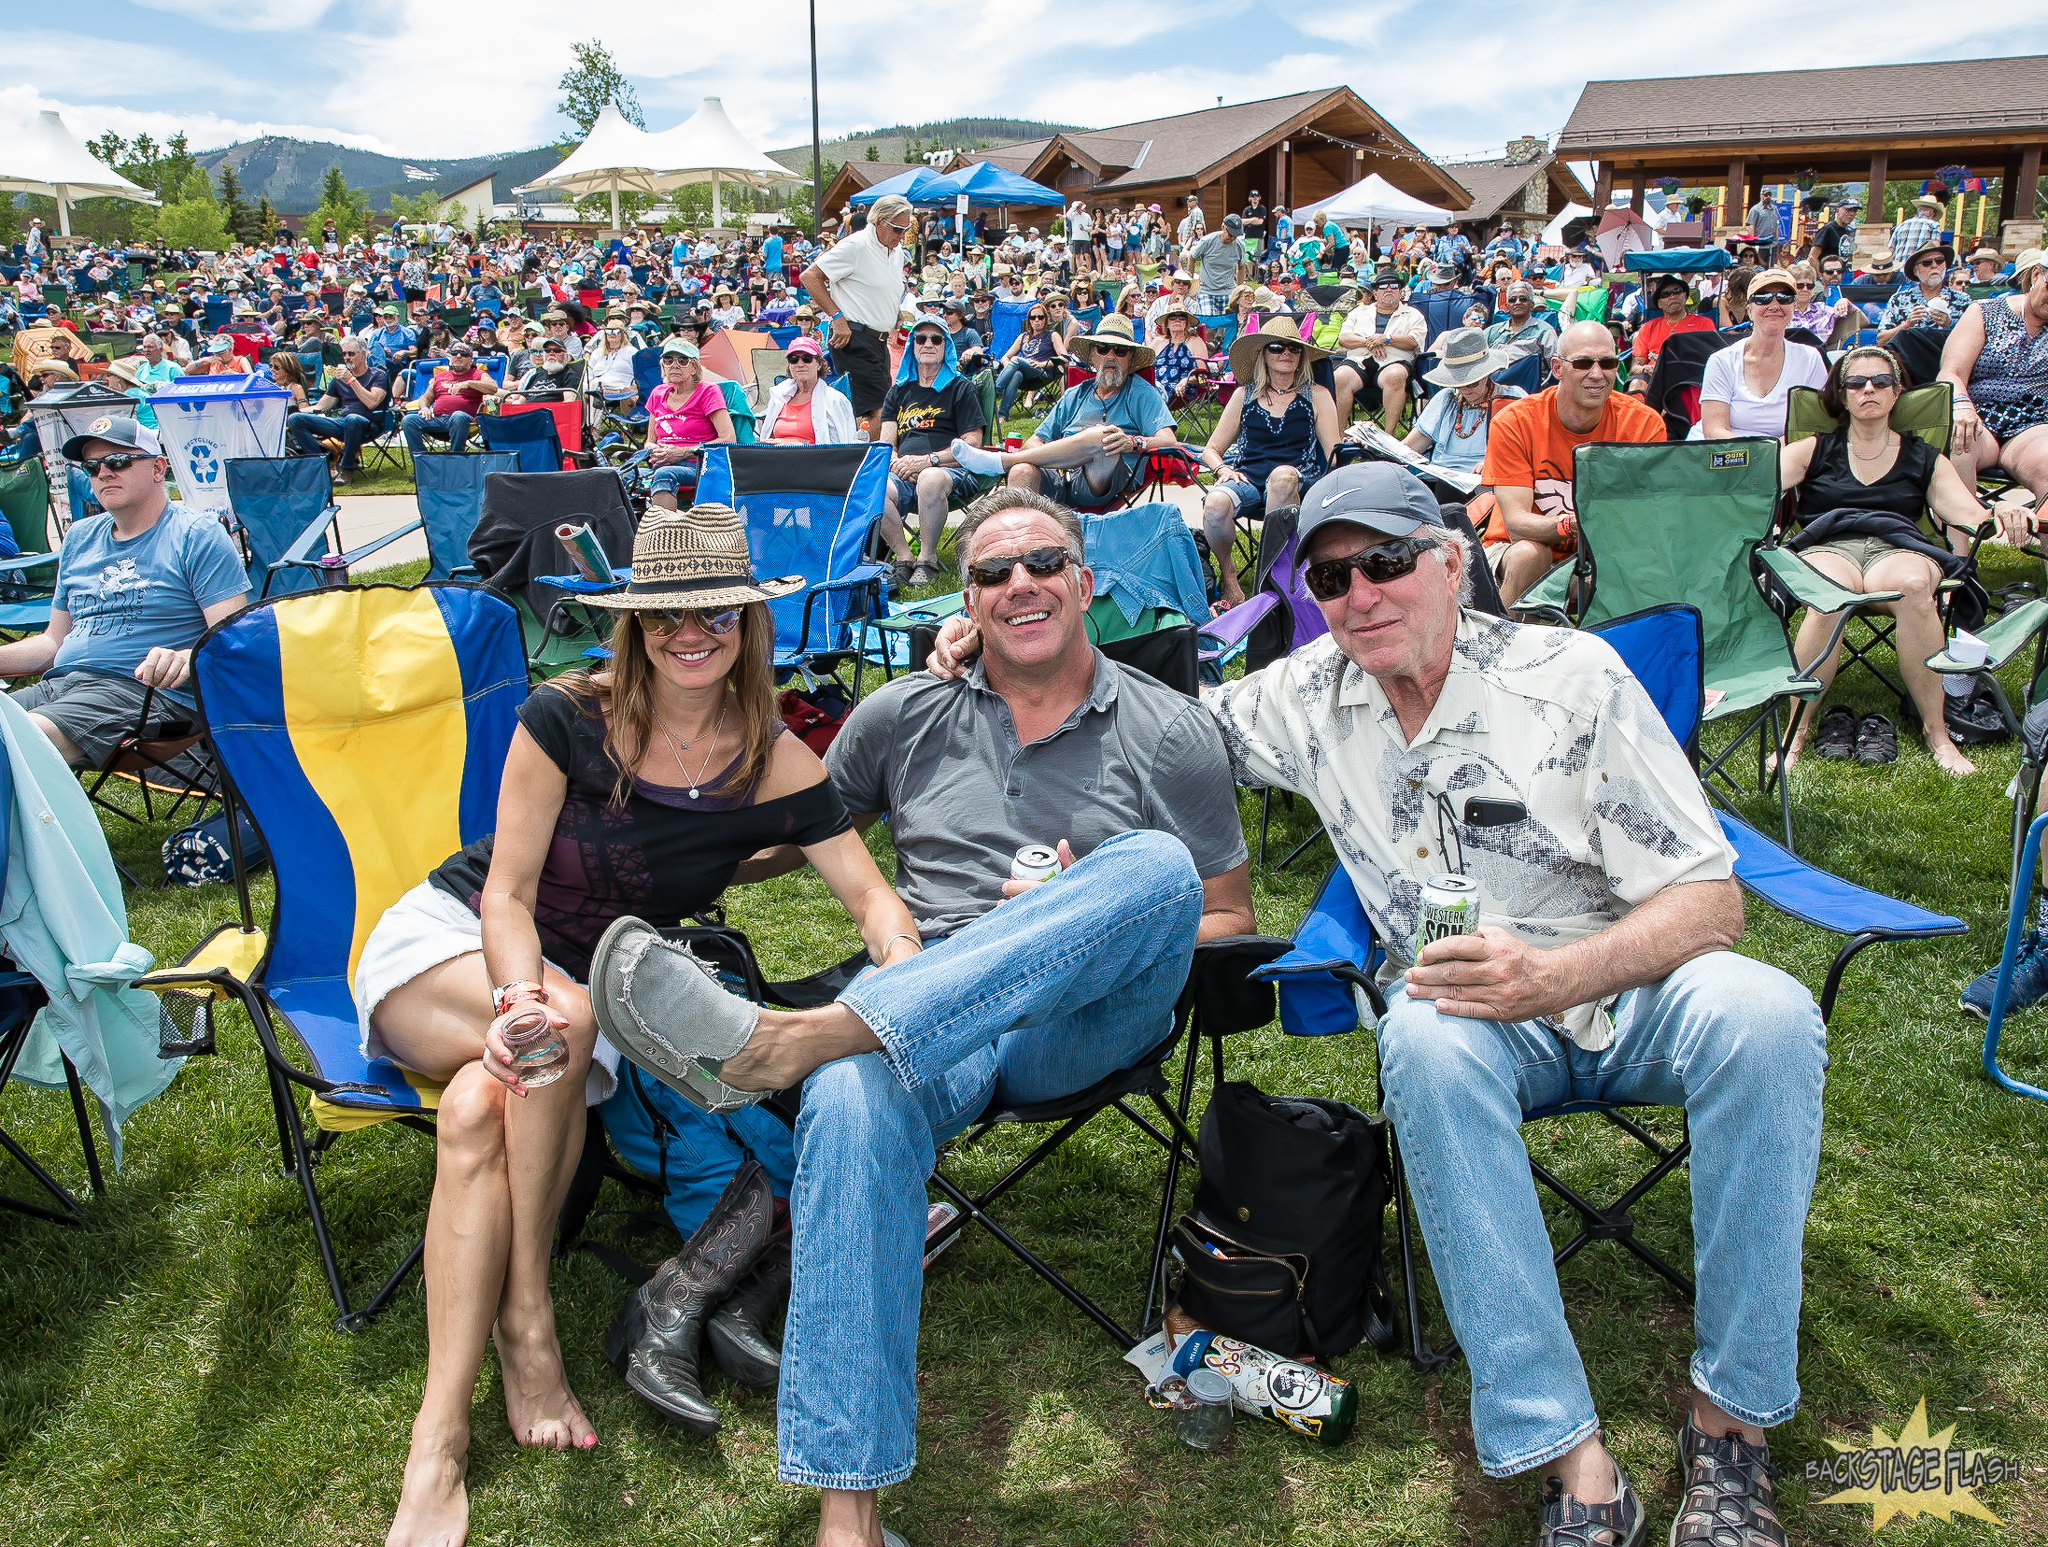 Music fans enjoying the day in the sun at Blues From The Top